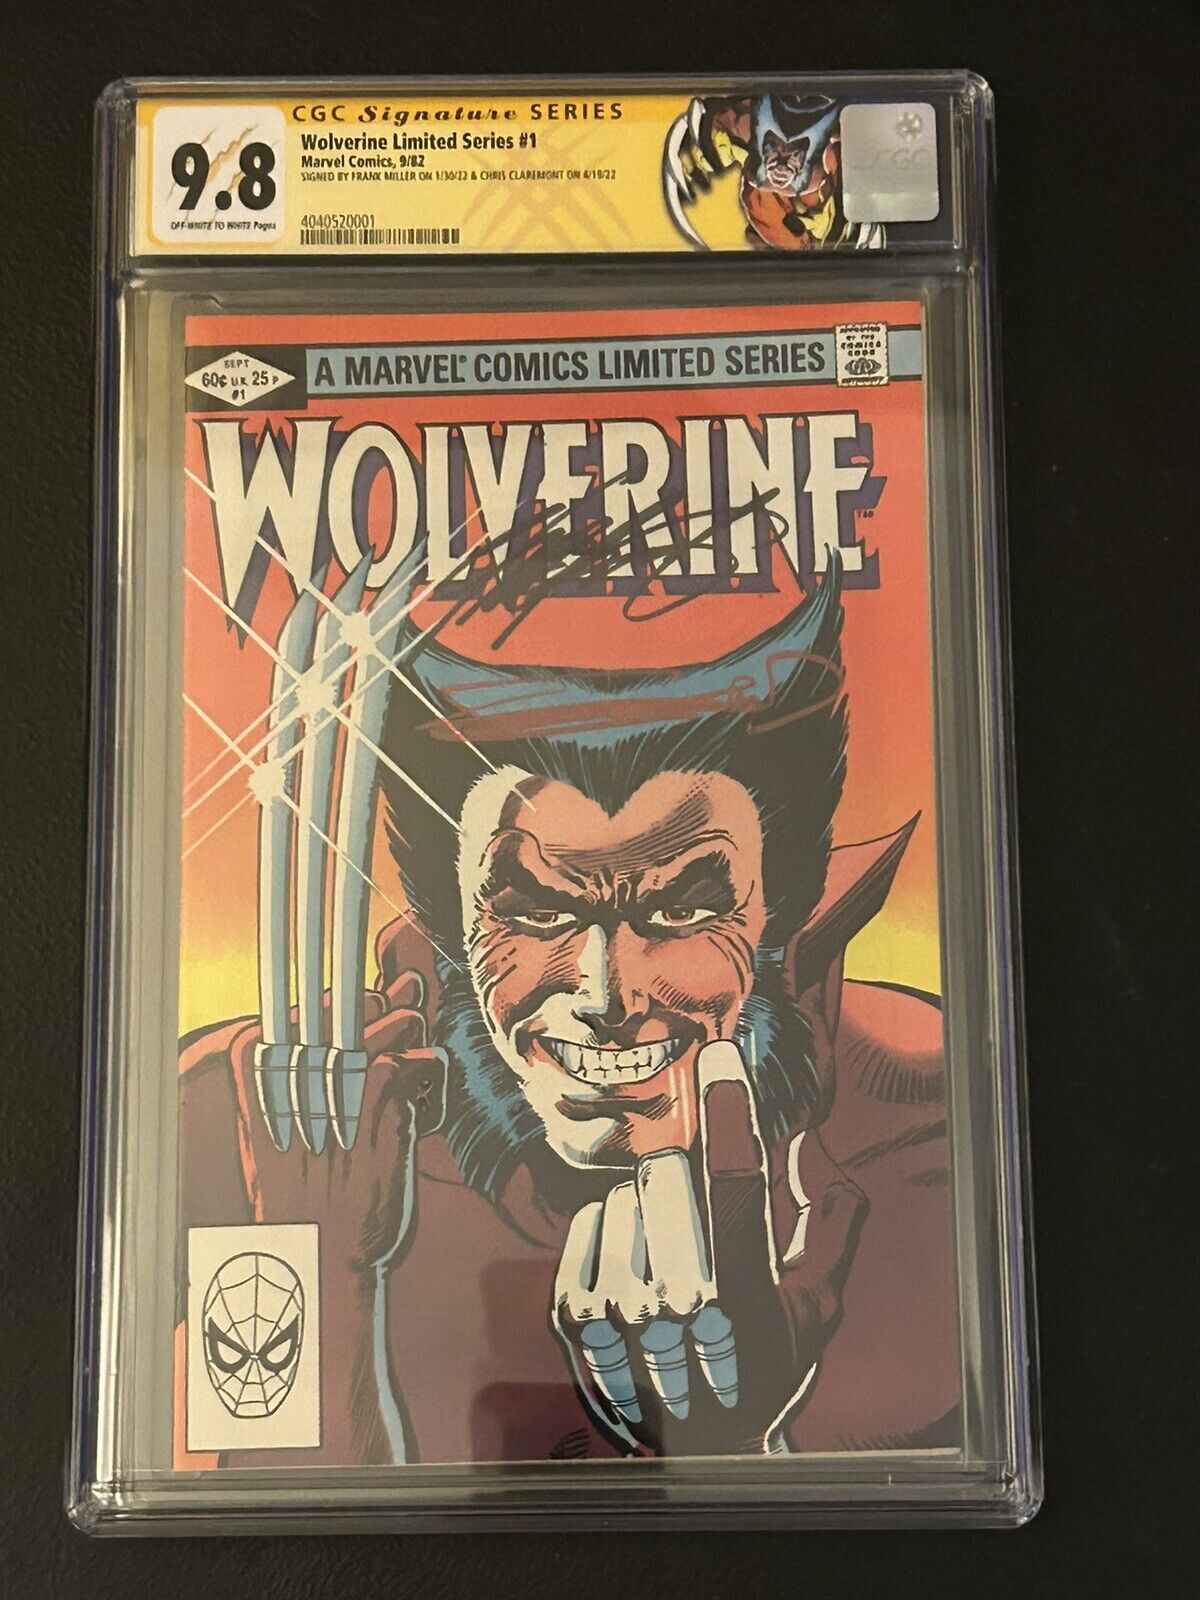 Wolverine #1 CGC SS 9.8 White Signed Chris Claremont + Frank Miller 1st Patch!!